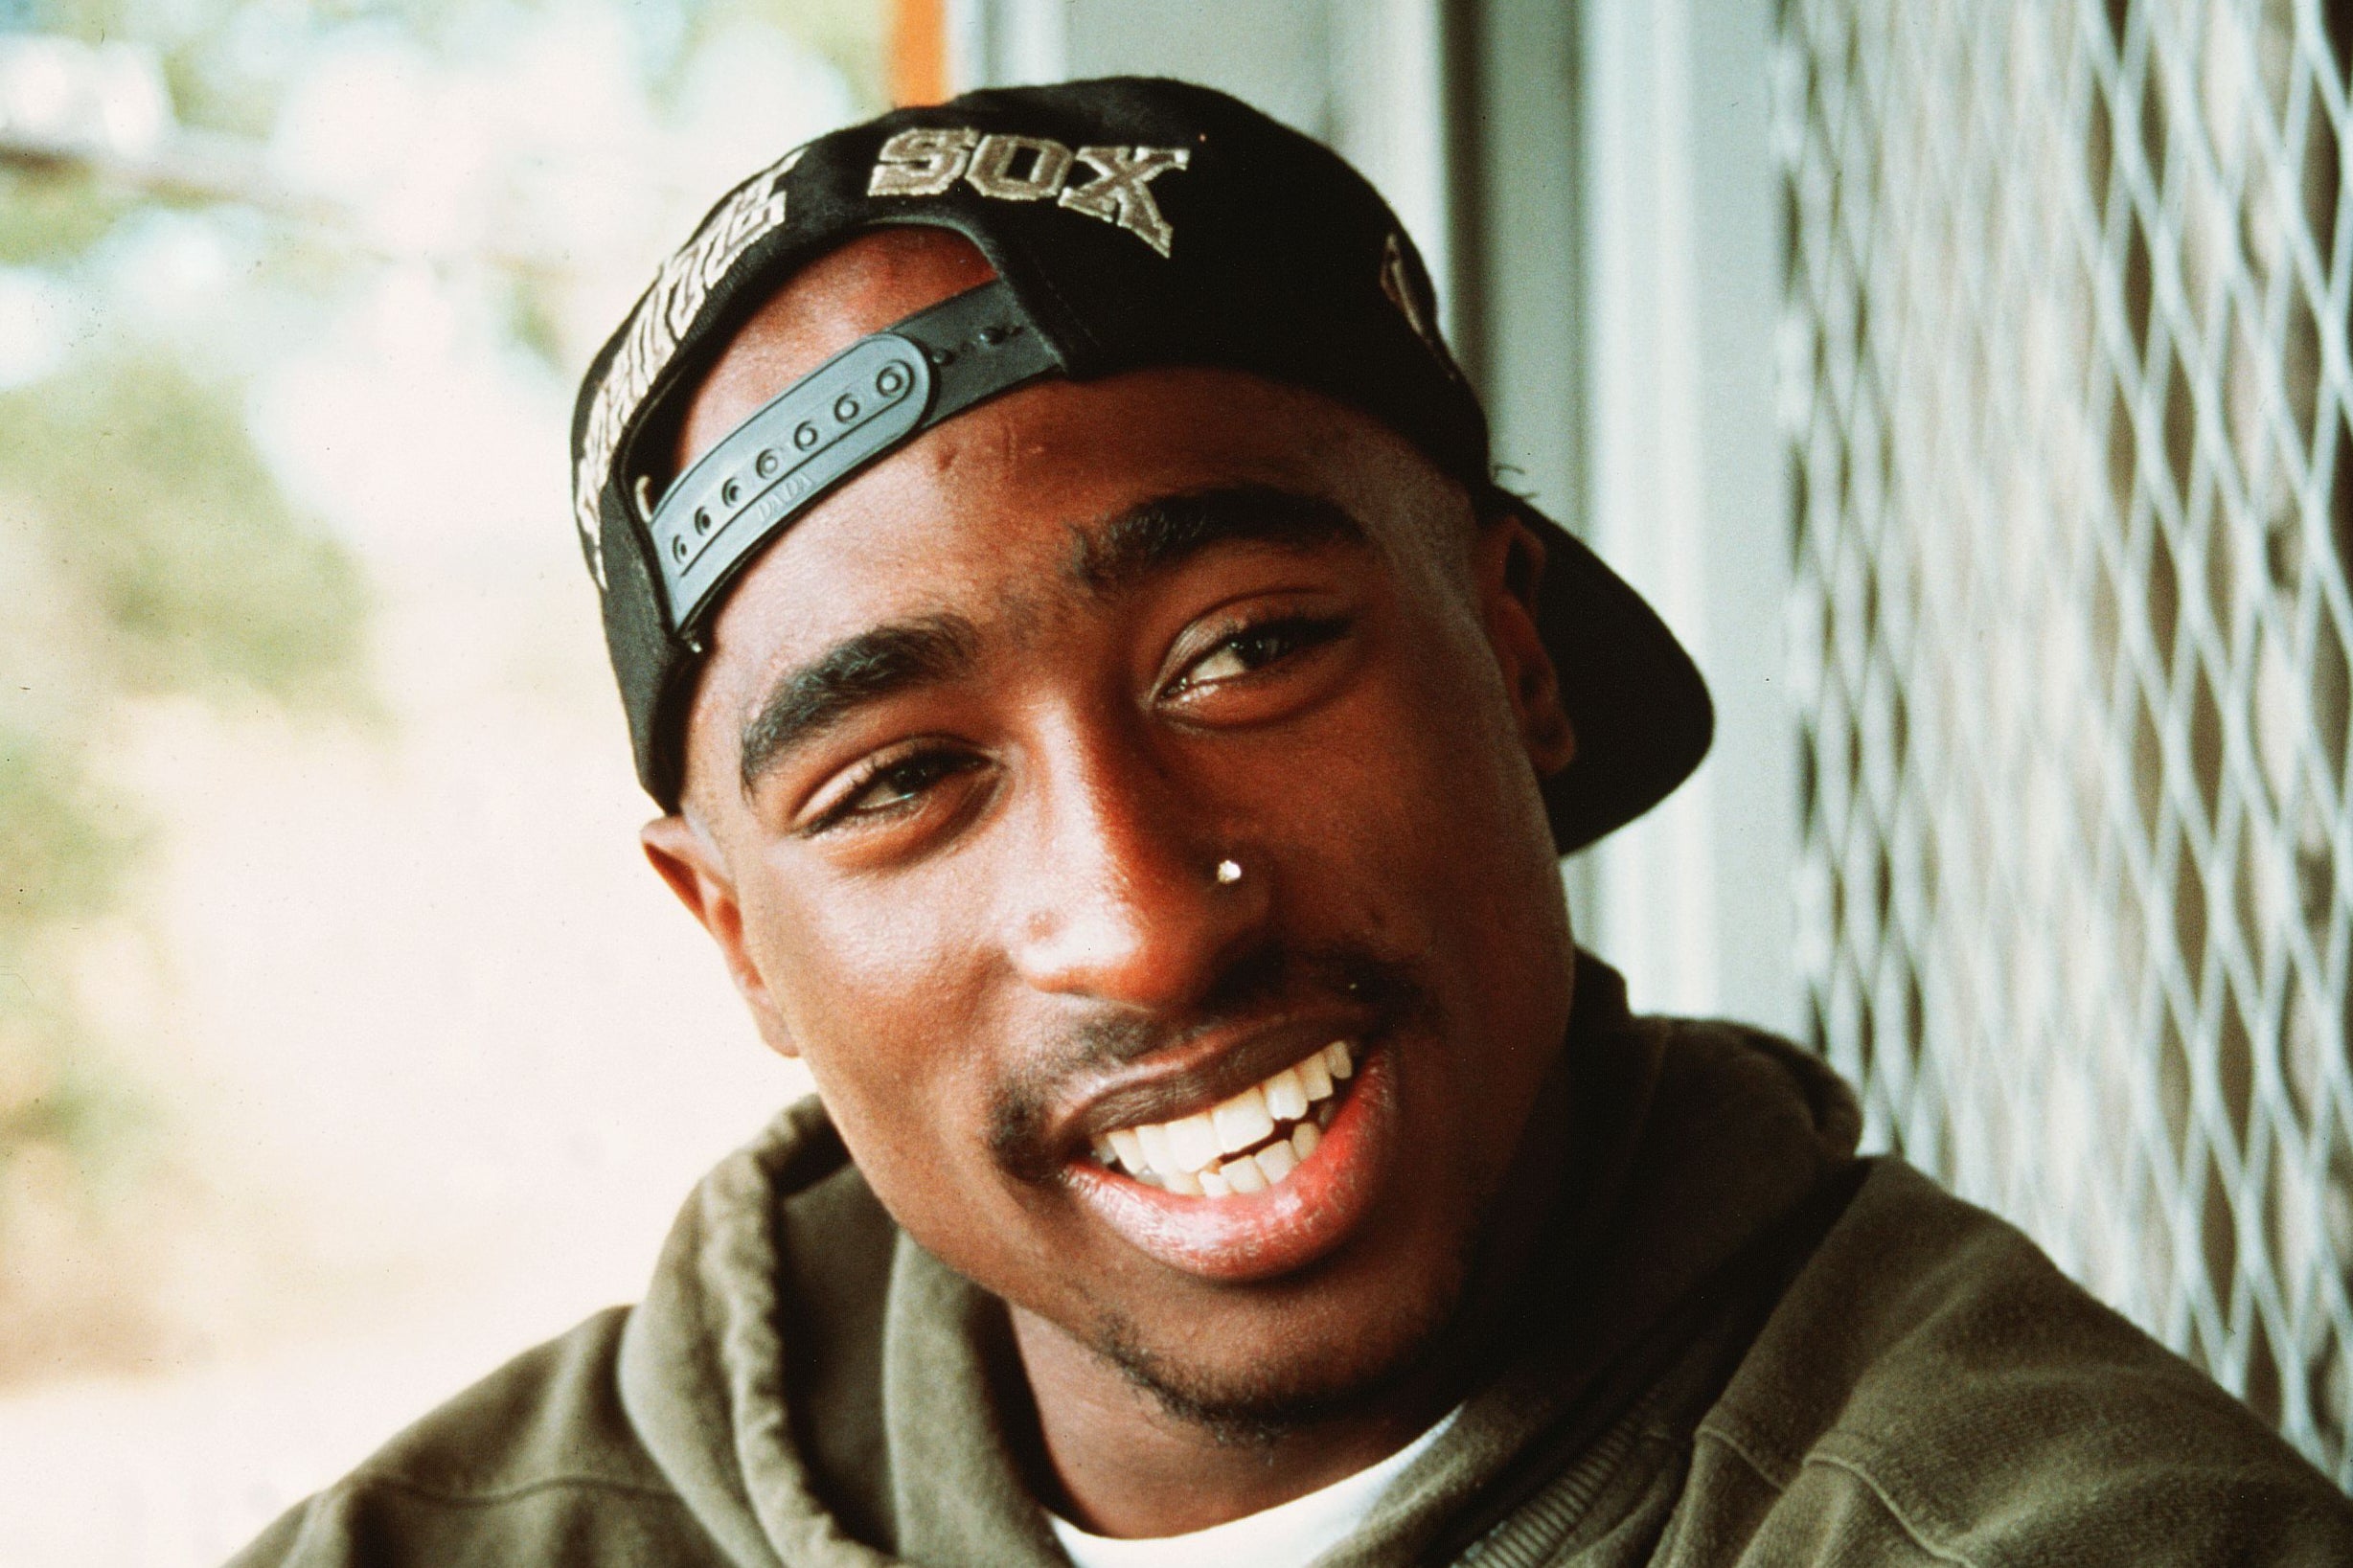 All eyes on me: Tupac Shakur, photographed for ‘Poetic Justice’ in 1993